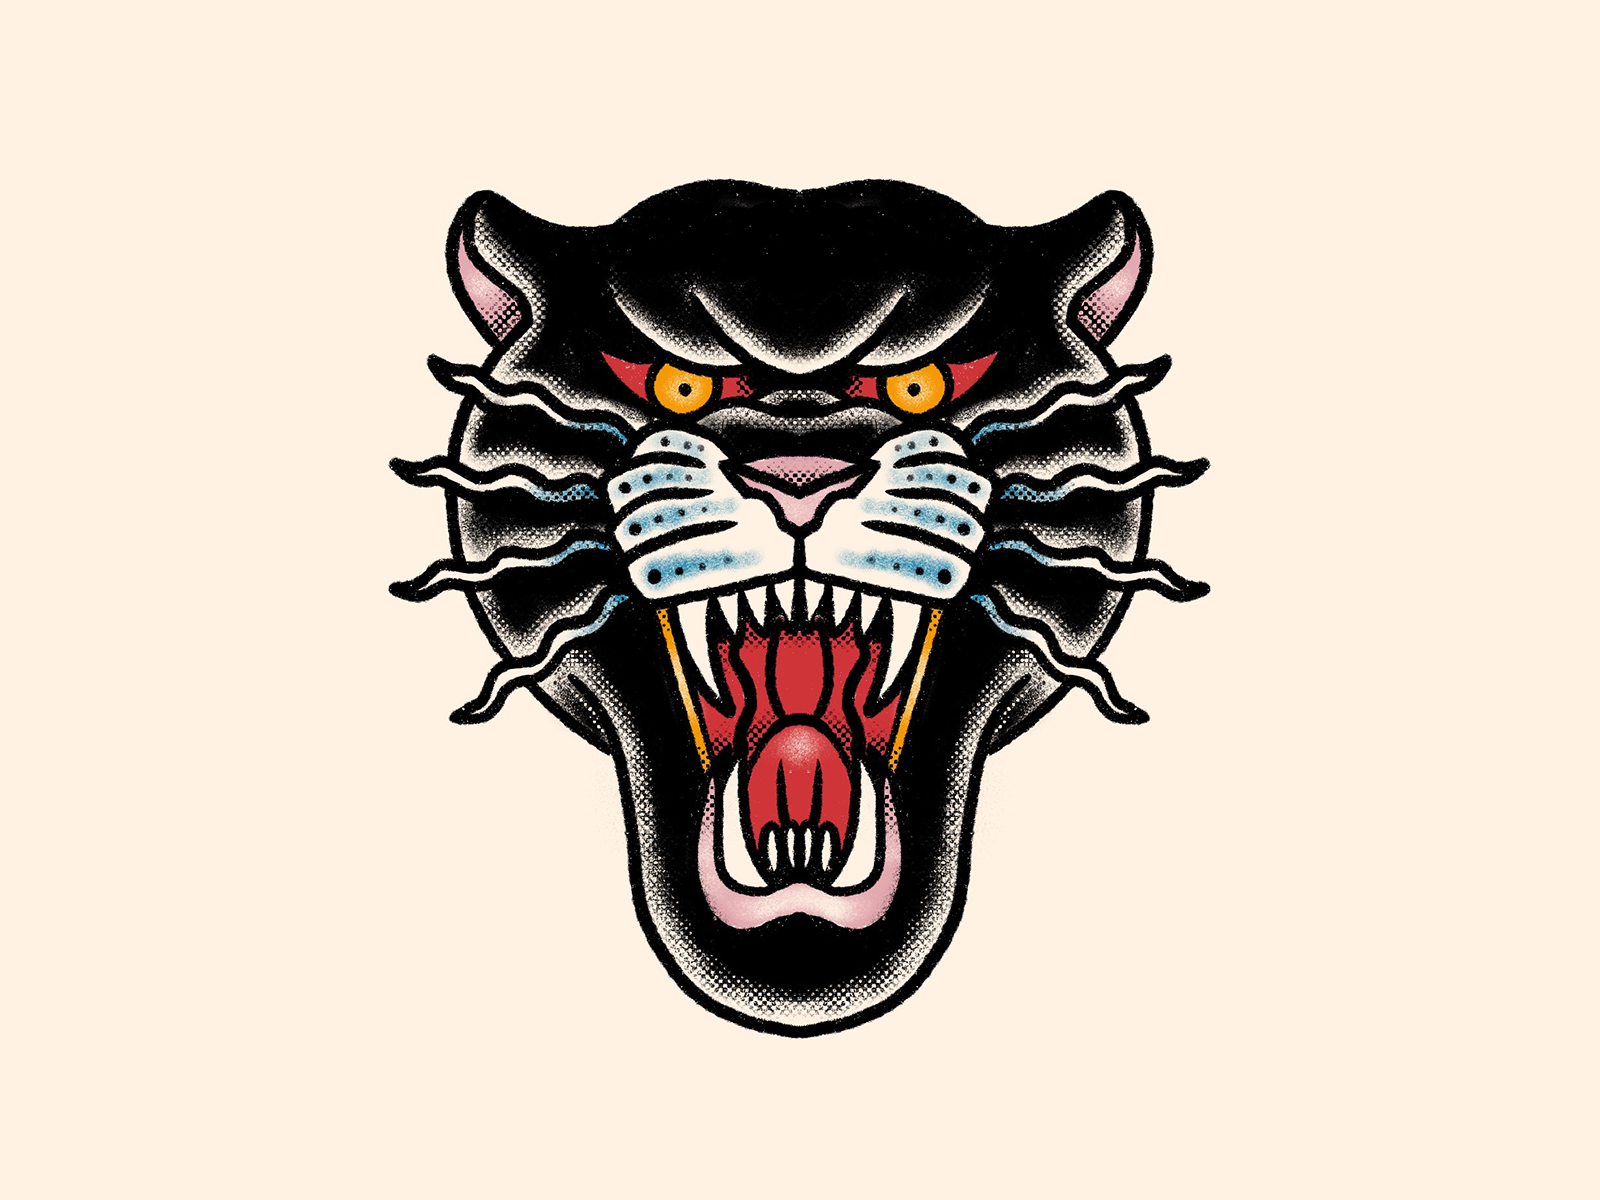 321 Panther Flash Tattoo Images Stock Photos  Vectors  Shutterstock